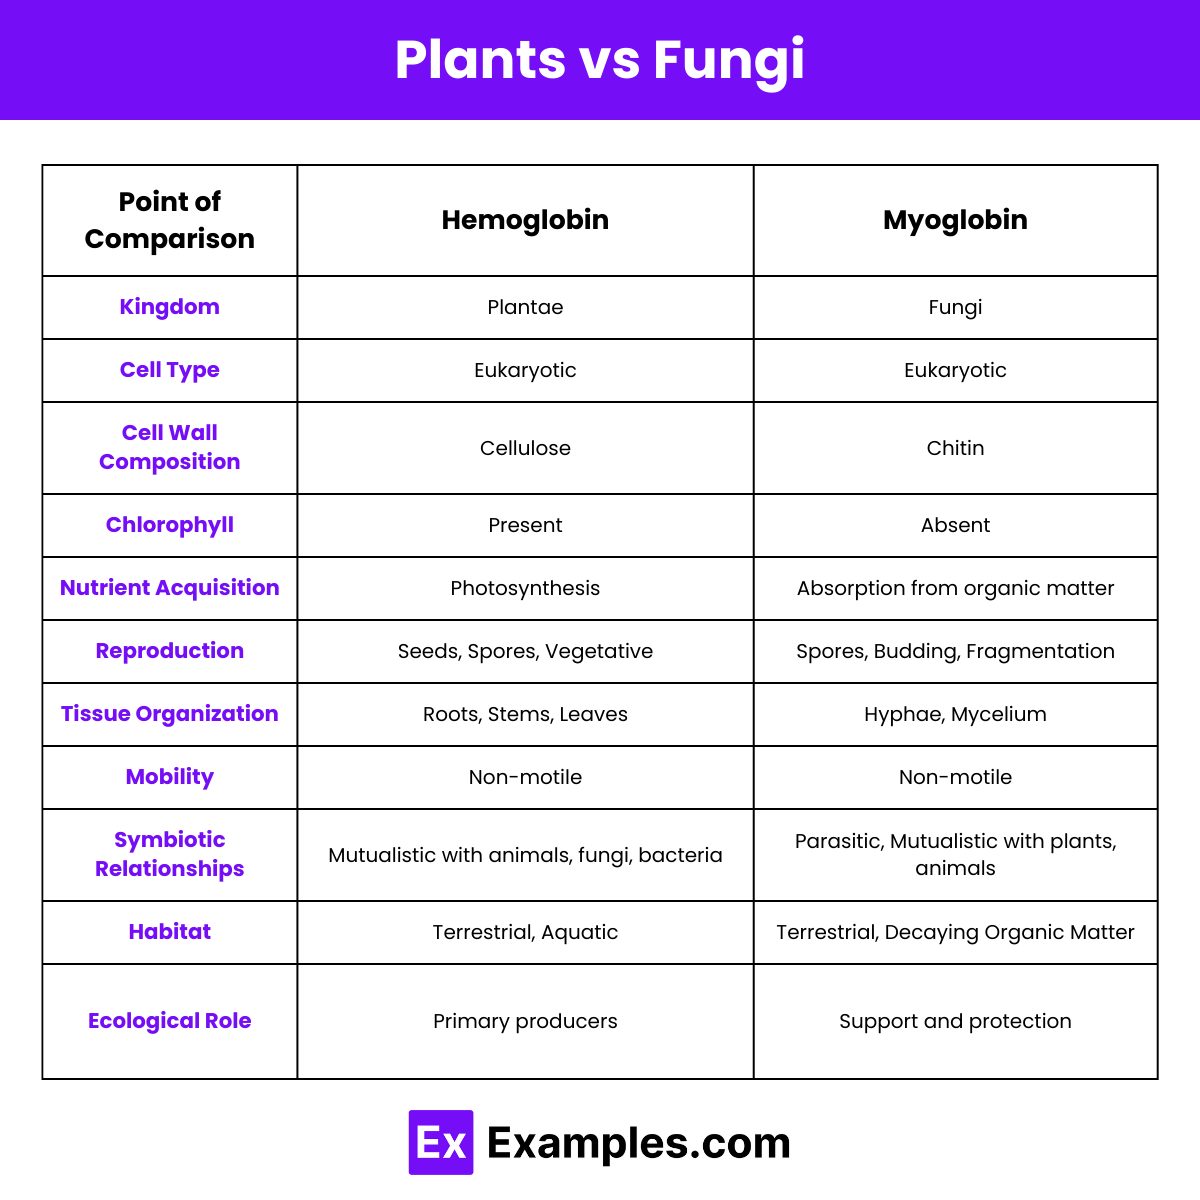 Differences Between Plants and Fungi